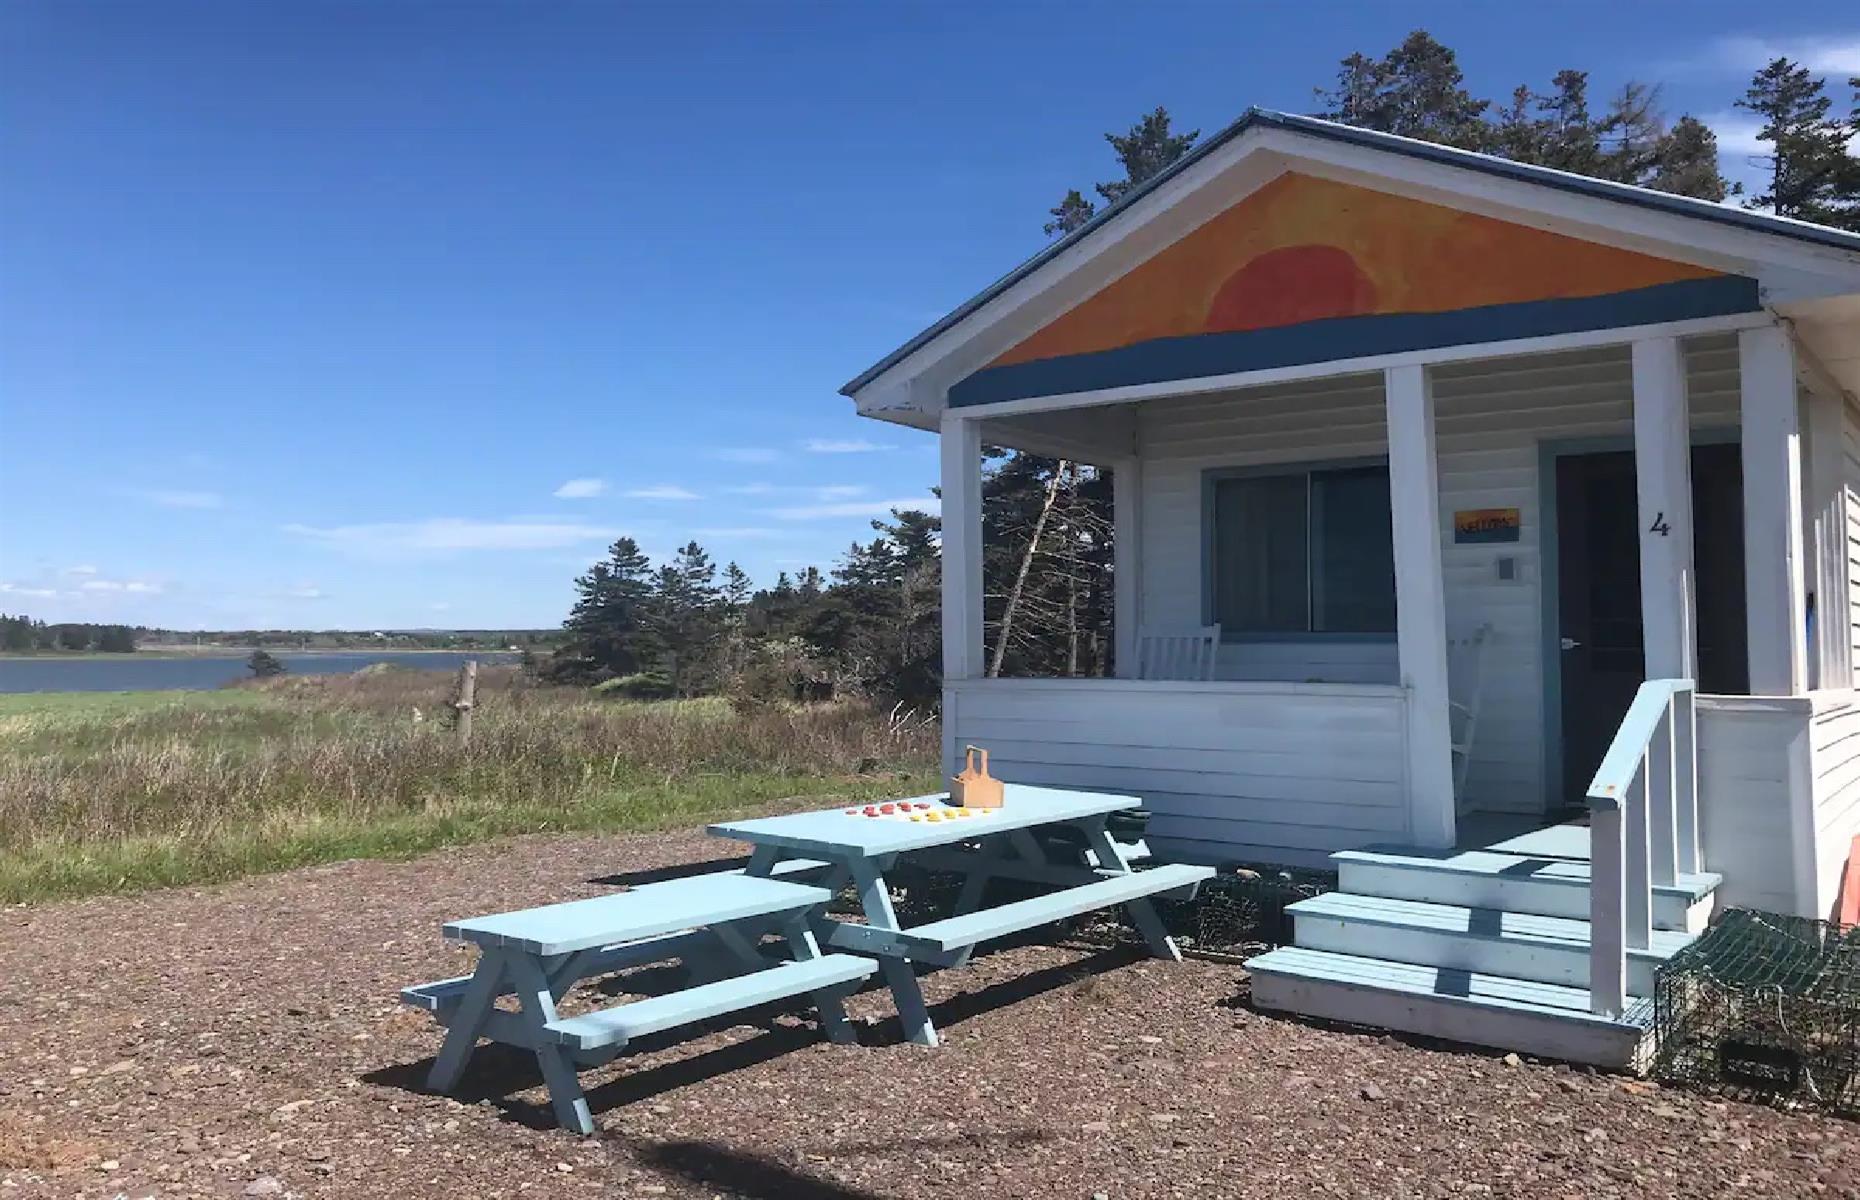 <p>Journey down a gravel road and along a beach causeway to access this <a href="https://www.airbnb.co.uk/rooms/26938190?adults=1&category_tag=Tag%3A8186&children=0&infants=0&check_in=2023-06-01&check_out=2023-06-06&federated_search_id=911a7dad-57a4-4cc9-b8ef-86e7668676f6&source_impression_id=p3_1662852631_I%2BWb8iZ%2FSYTEVRIL">cottage</a> on a tiny island off the coast of Nova Scotia’s Antigonish County. The studio home can technically sleep three, but it’s even better as a solo retreat for an artist or writer or as a romantic getaway for a couple. It’s not fancy, but it’s incredibly quiet and close to the water, making it a great place to breathe in the clean ocean air.</p>  <p><a href="https://www.loveexploring.com/gallerylist/137001/north-americas-best-beaches"><strong>These are North America's best beaches</strong></a></p>